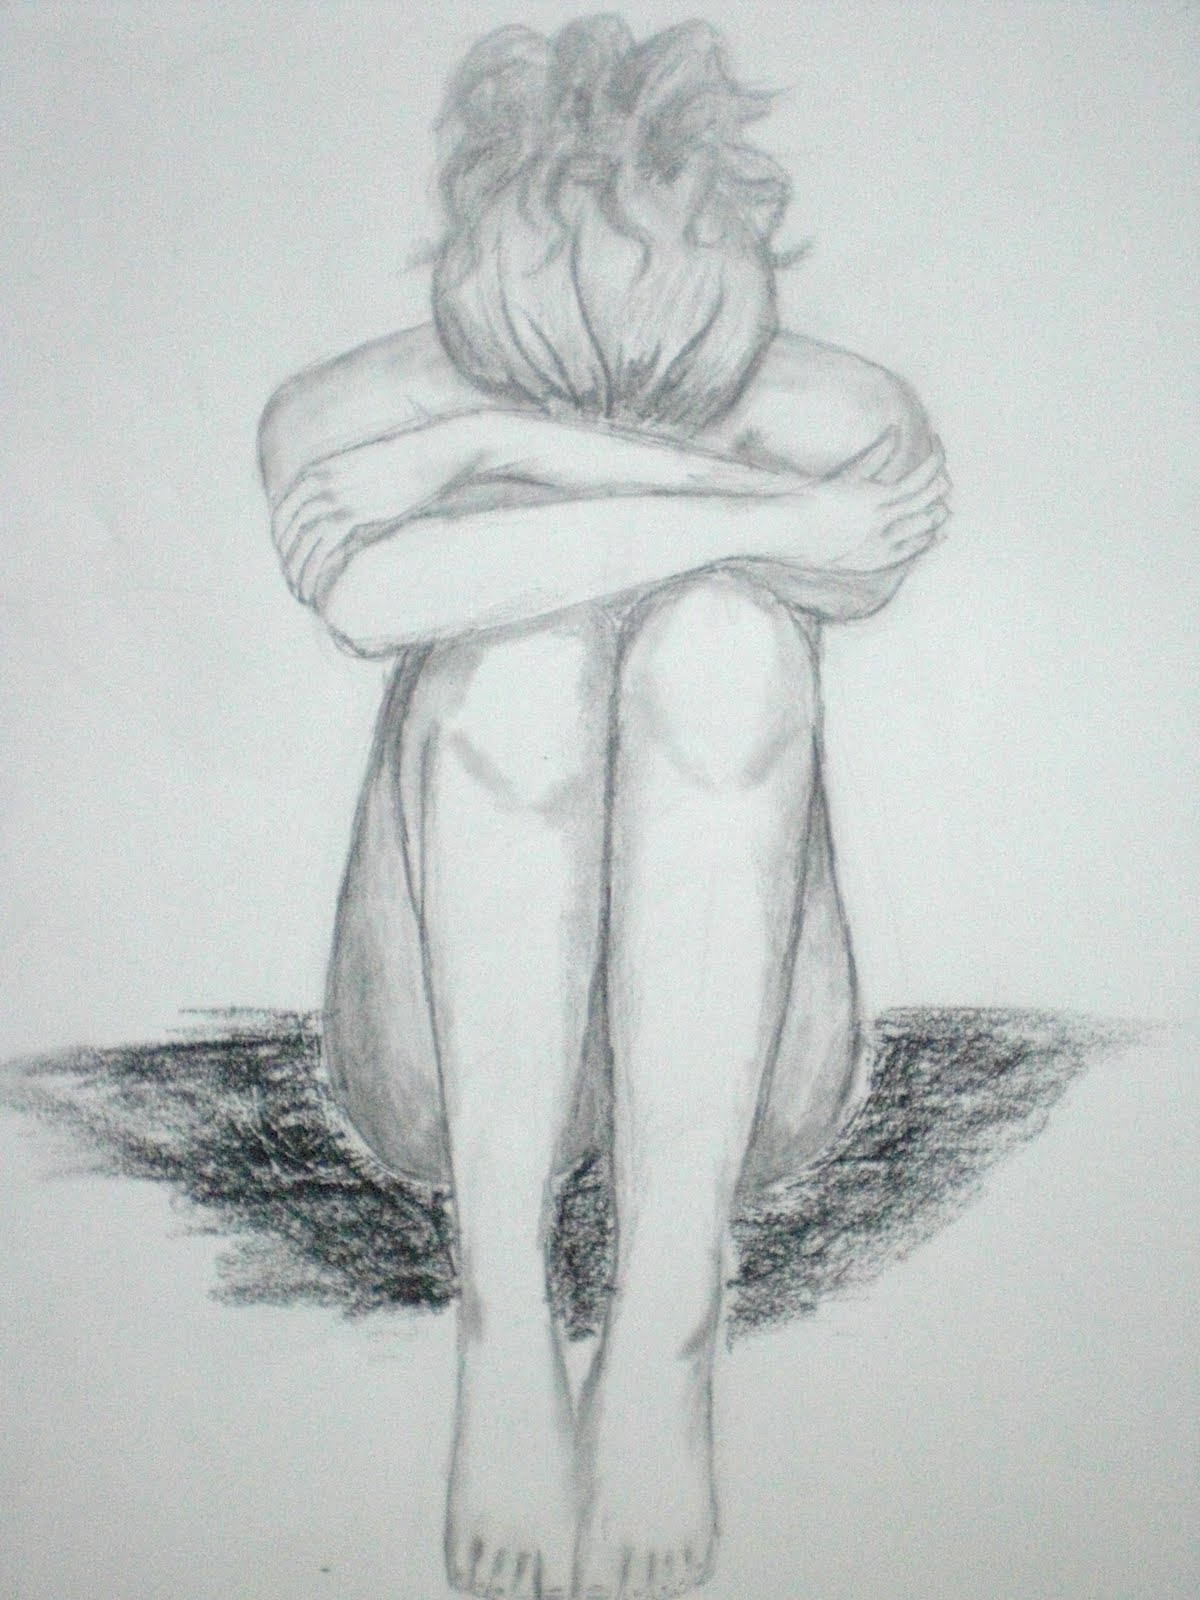 Sketch Girl Crying at Explore collection of Sketch